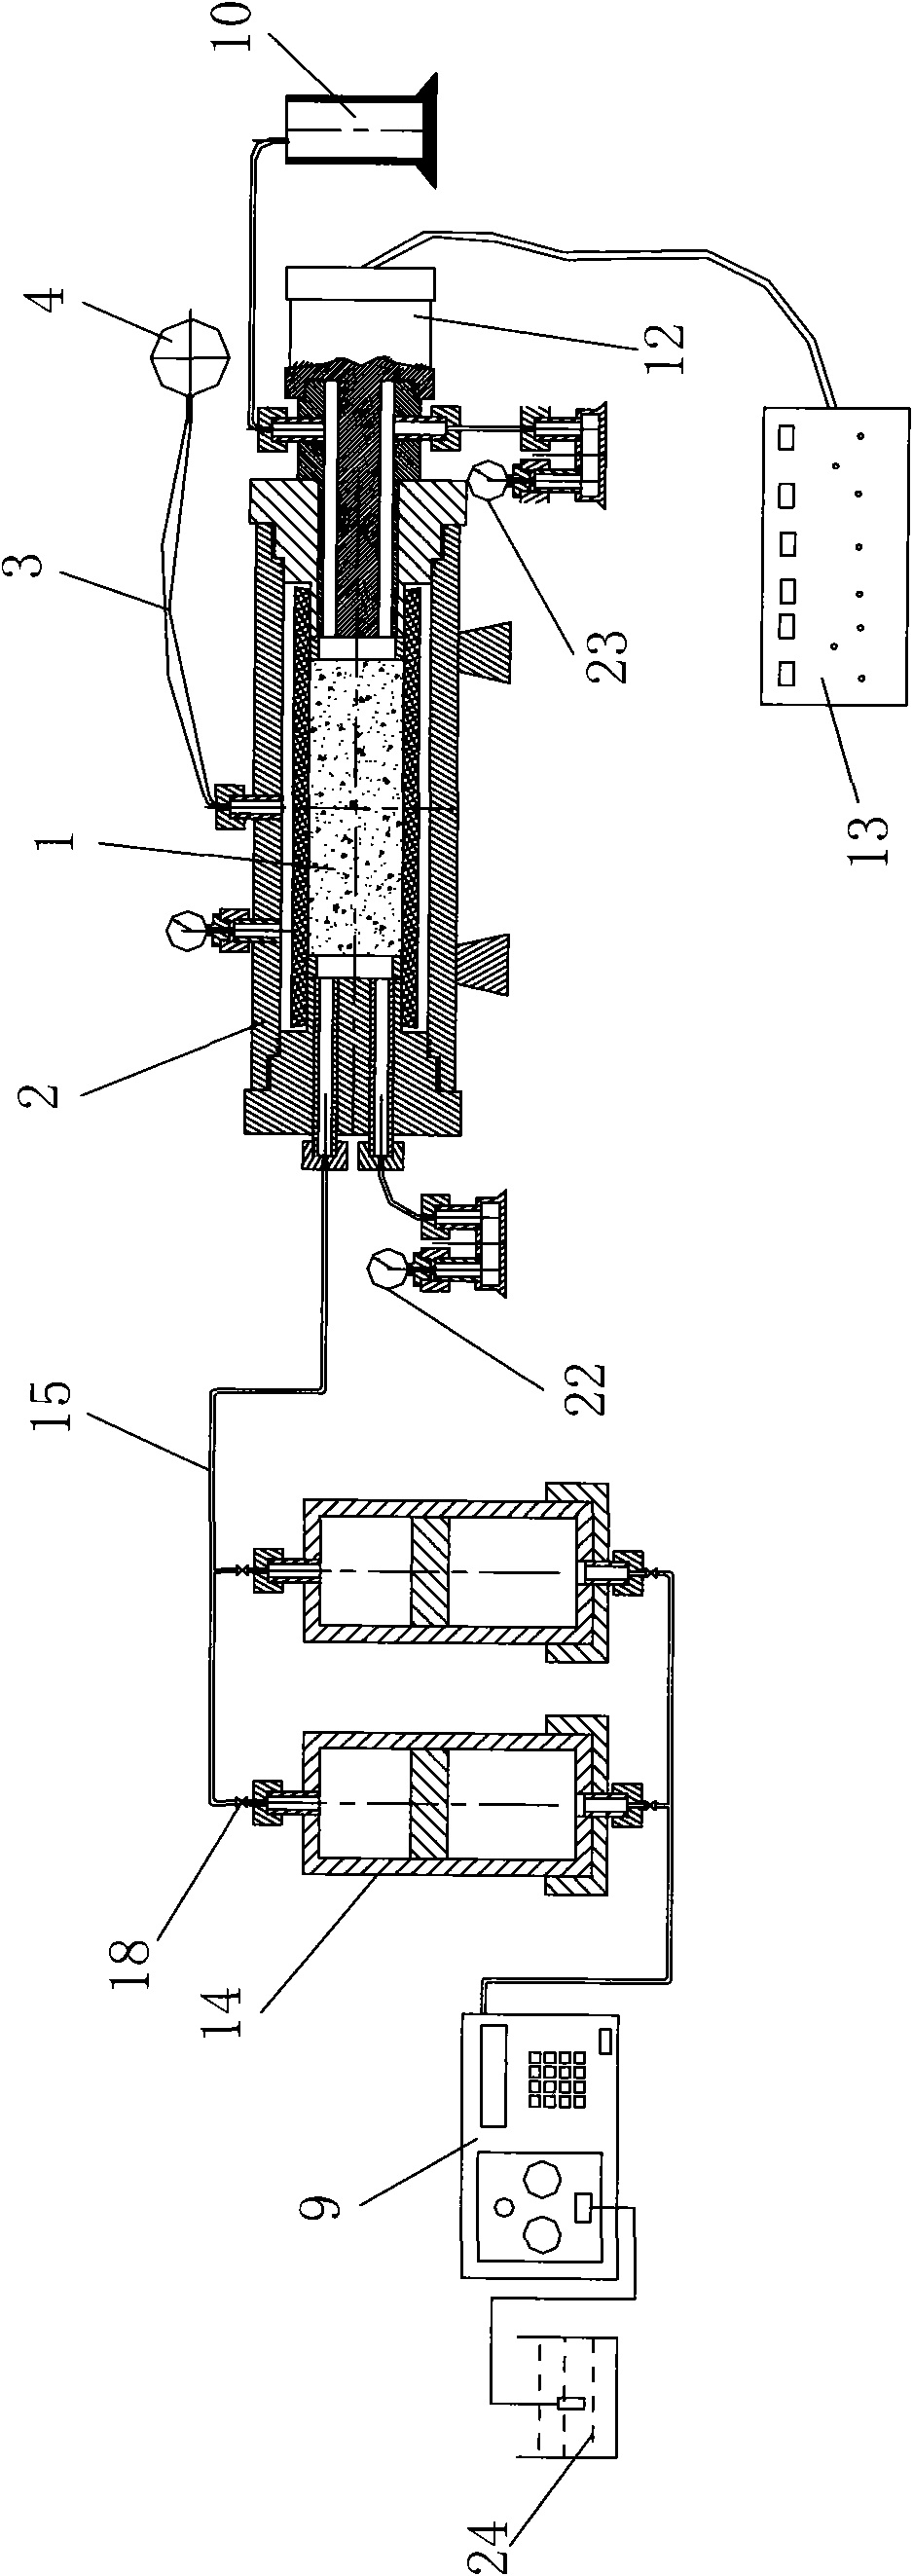 Ultrasonic-assisted reservoir stratum chemical blockage removal experimental facility and experimental method